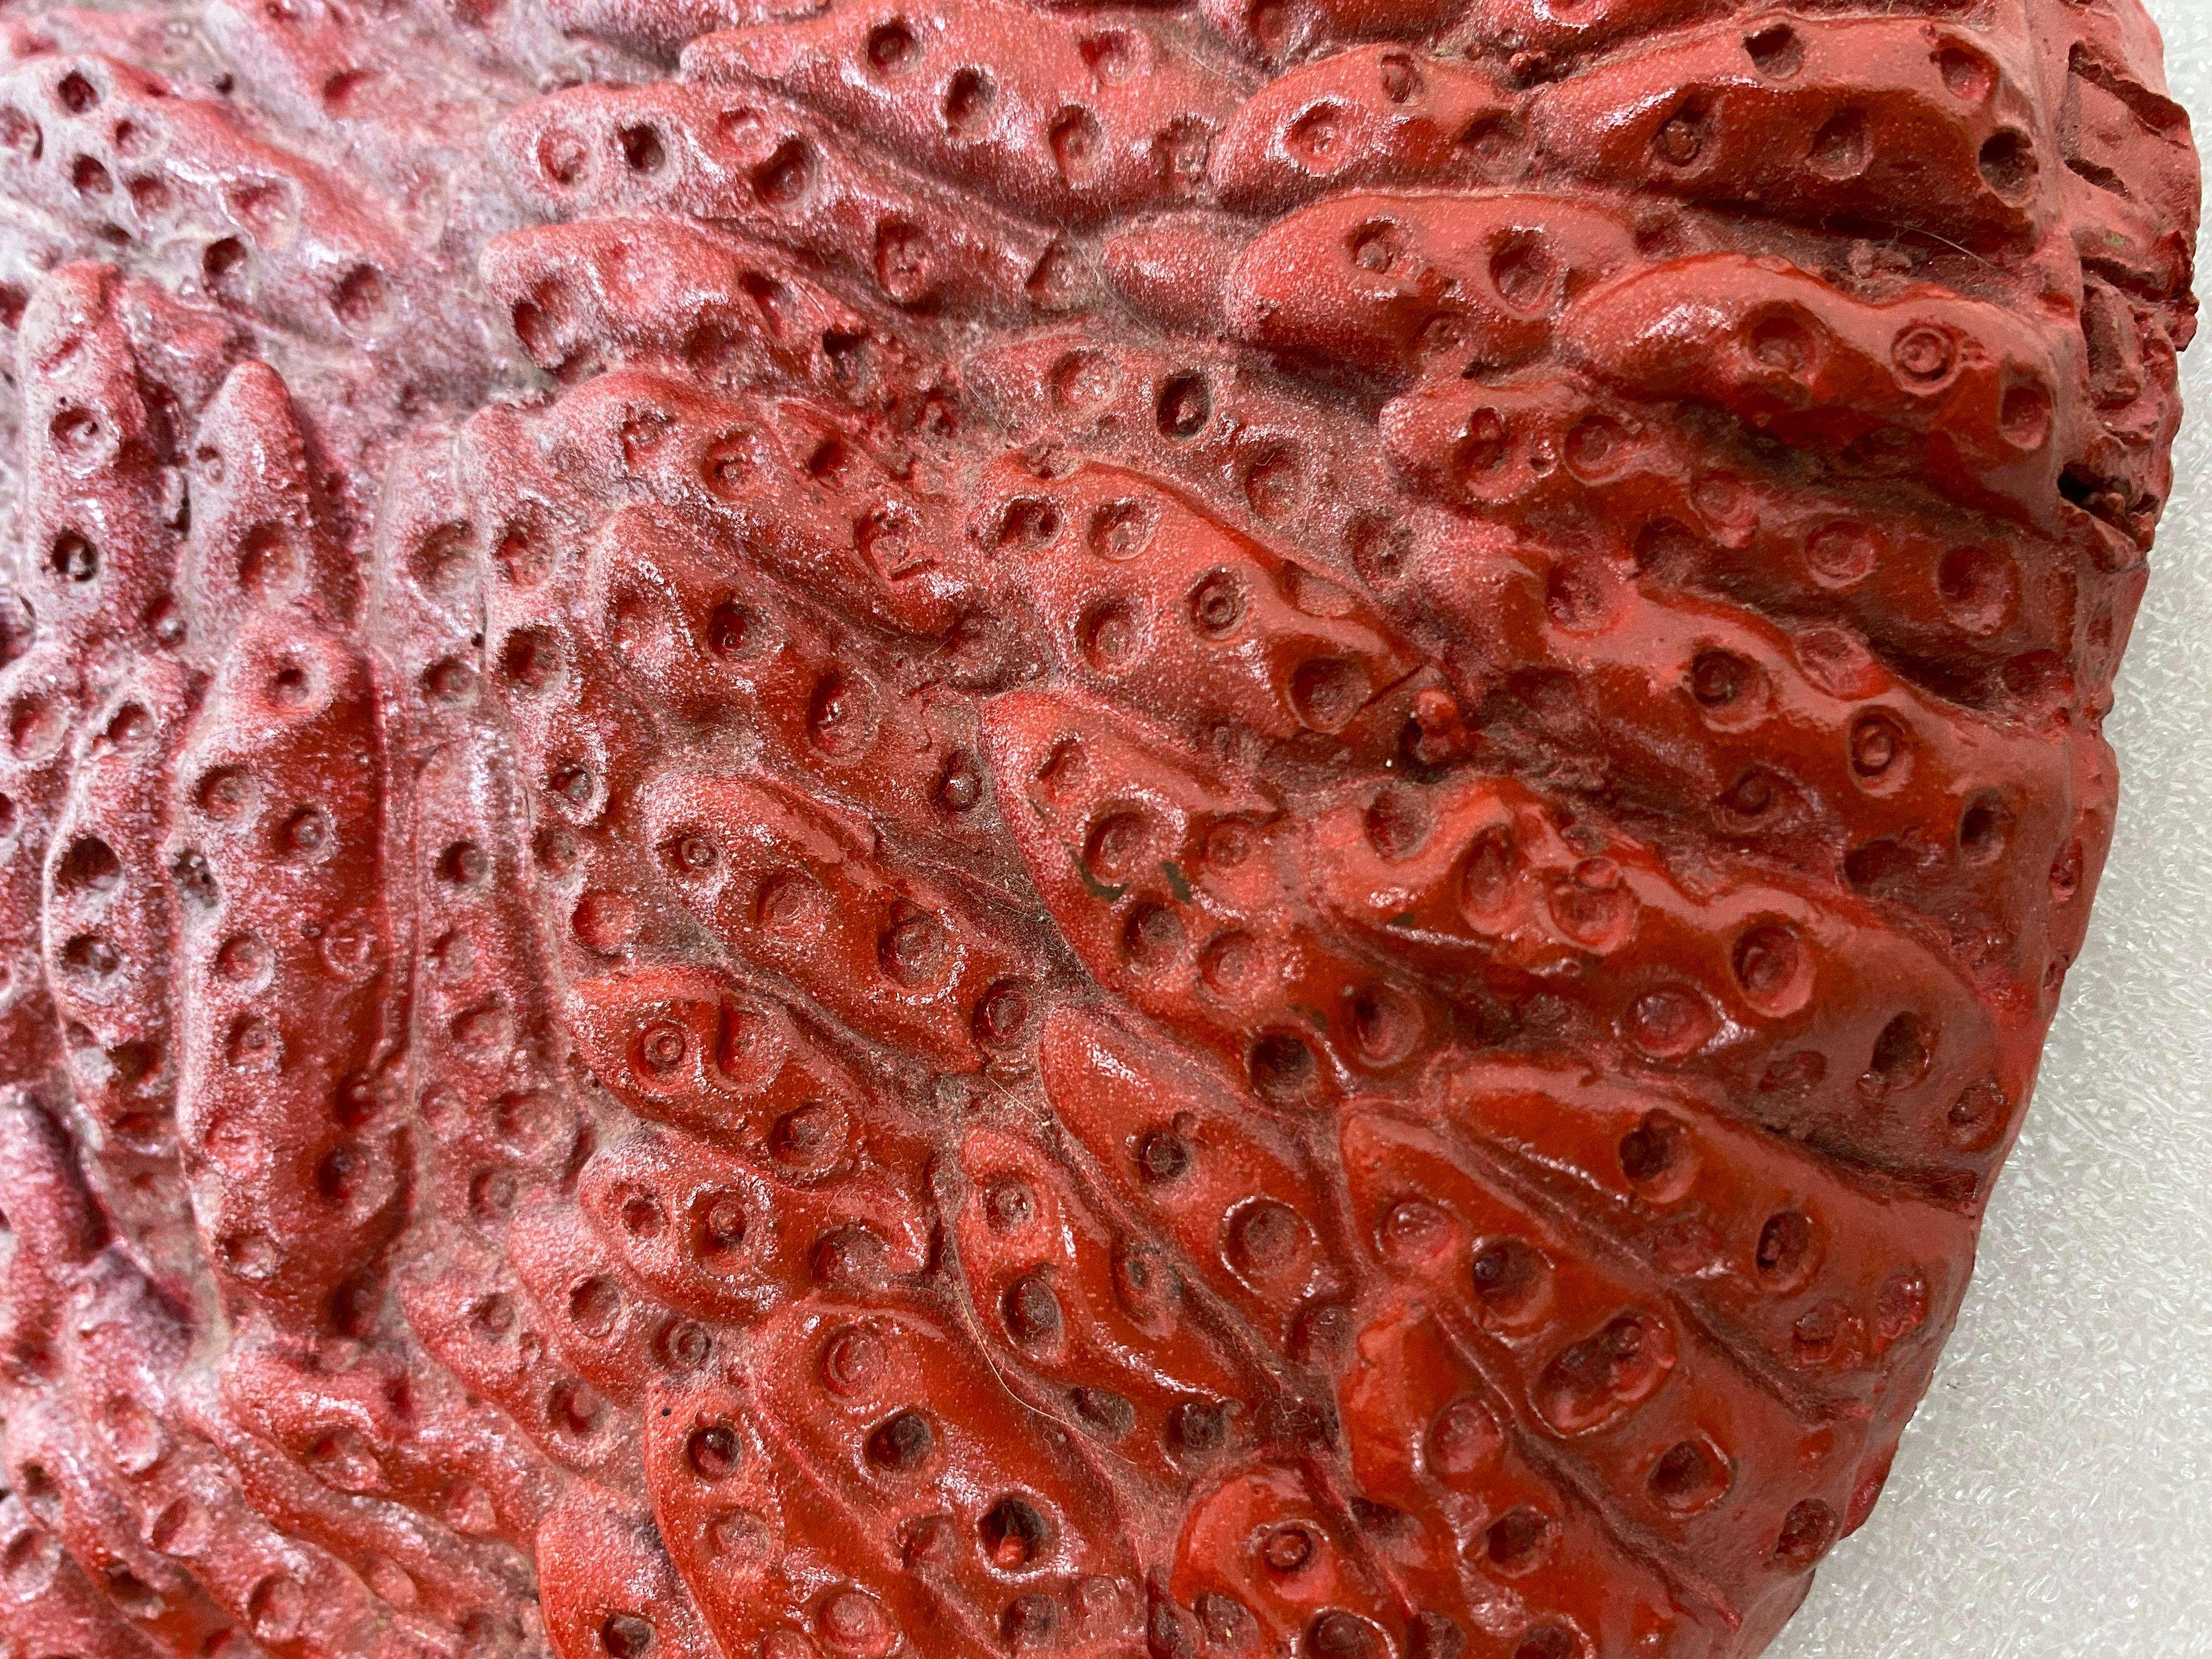 Strawberry 1. Bronze Sculpture by Yayoi Kusama (1974/93) Limited Edition of 30 For Sale 5